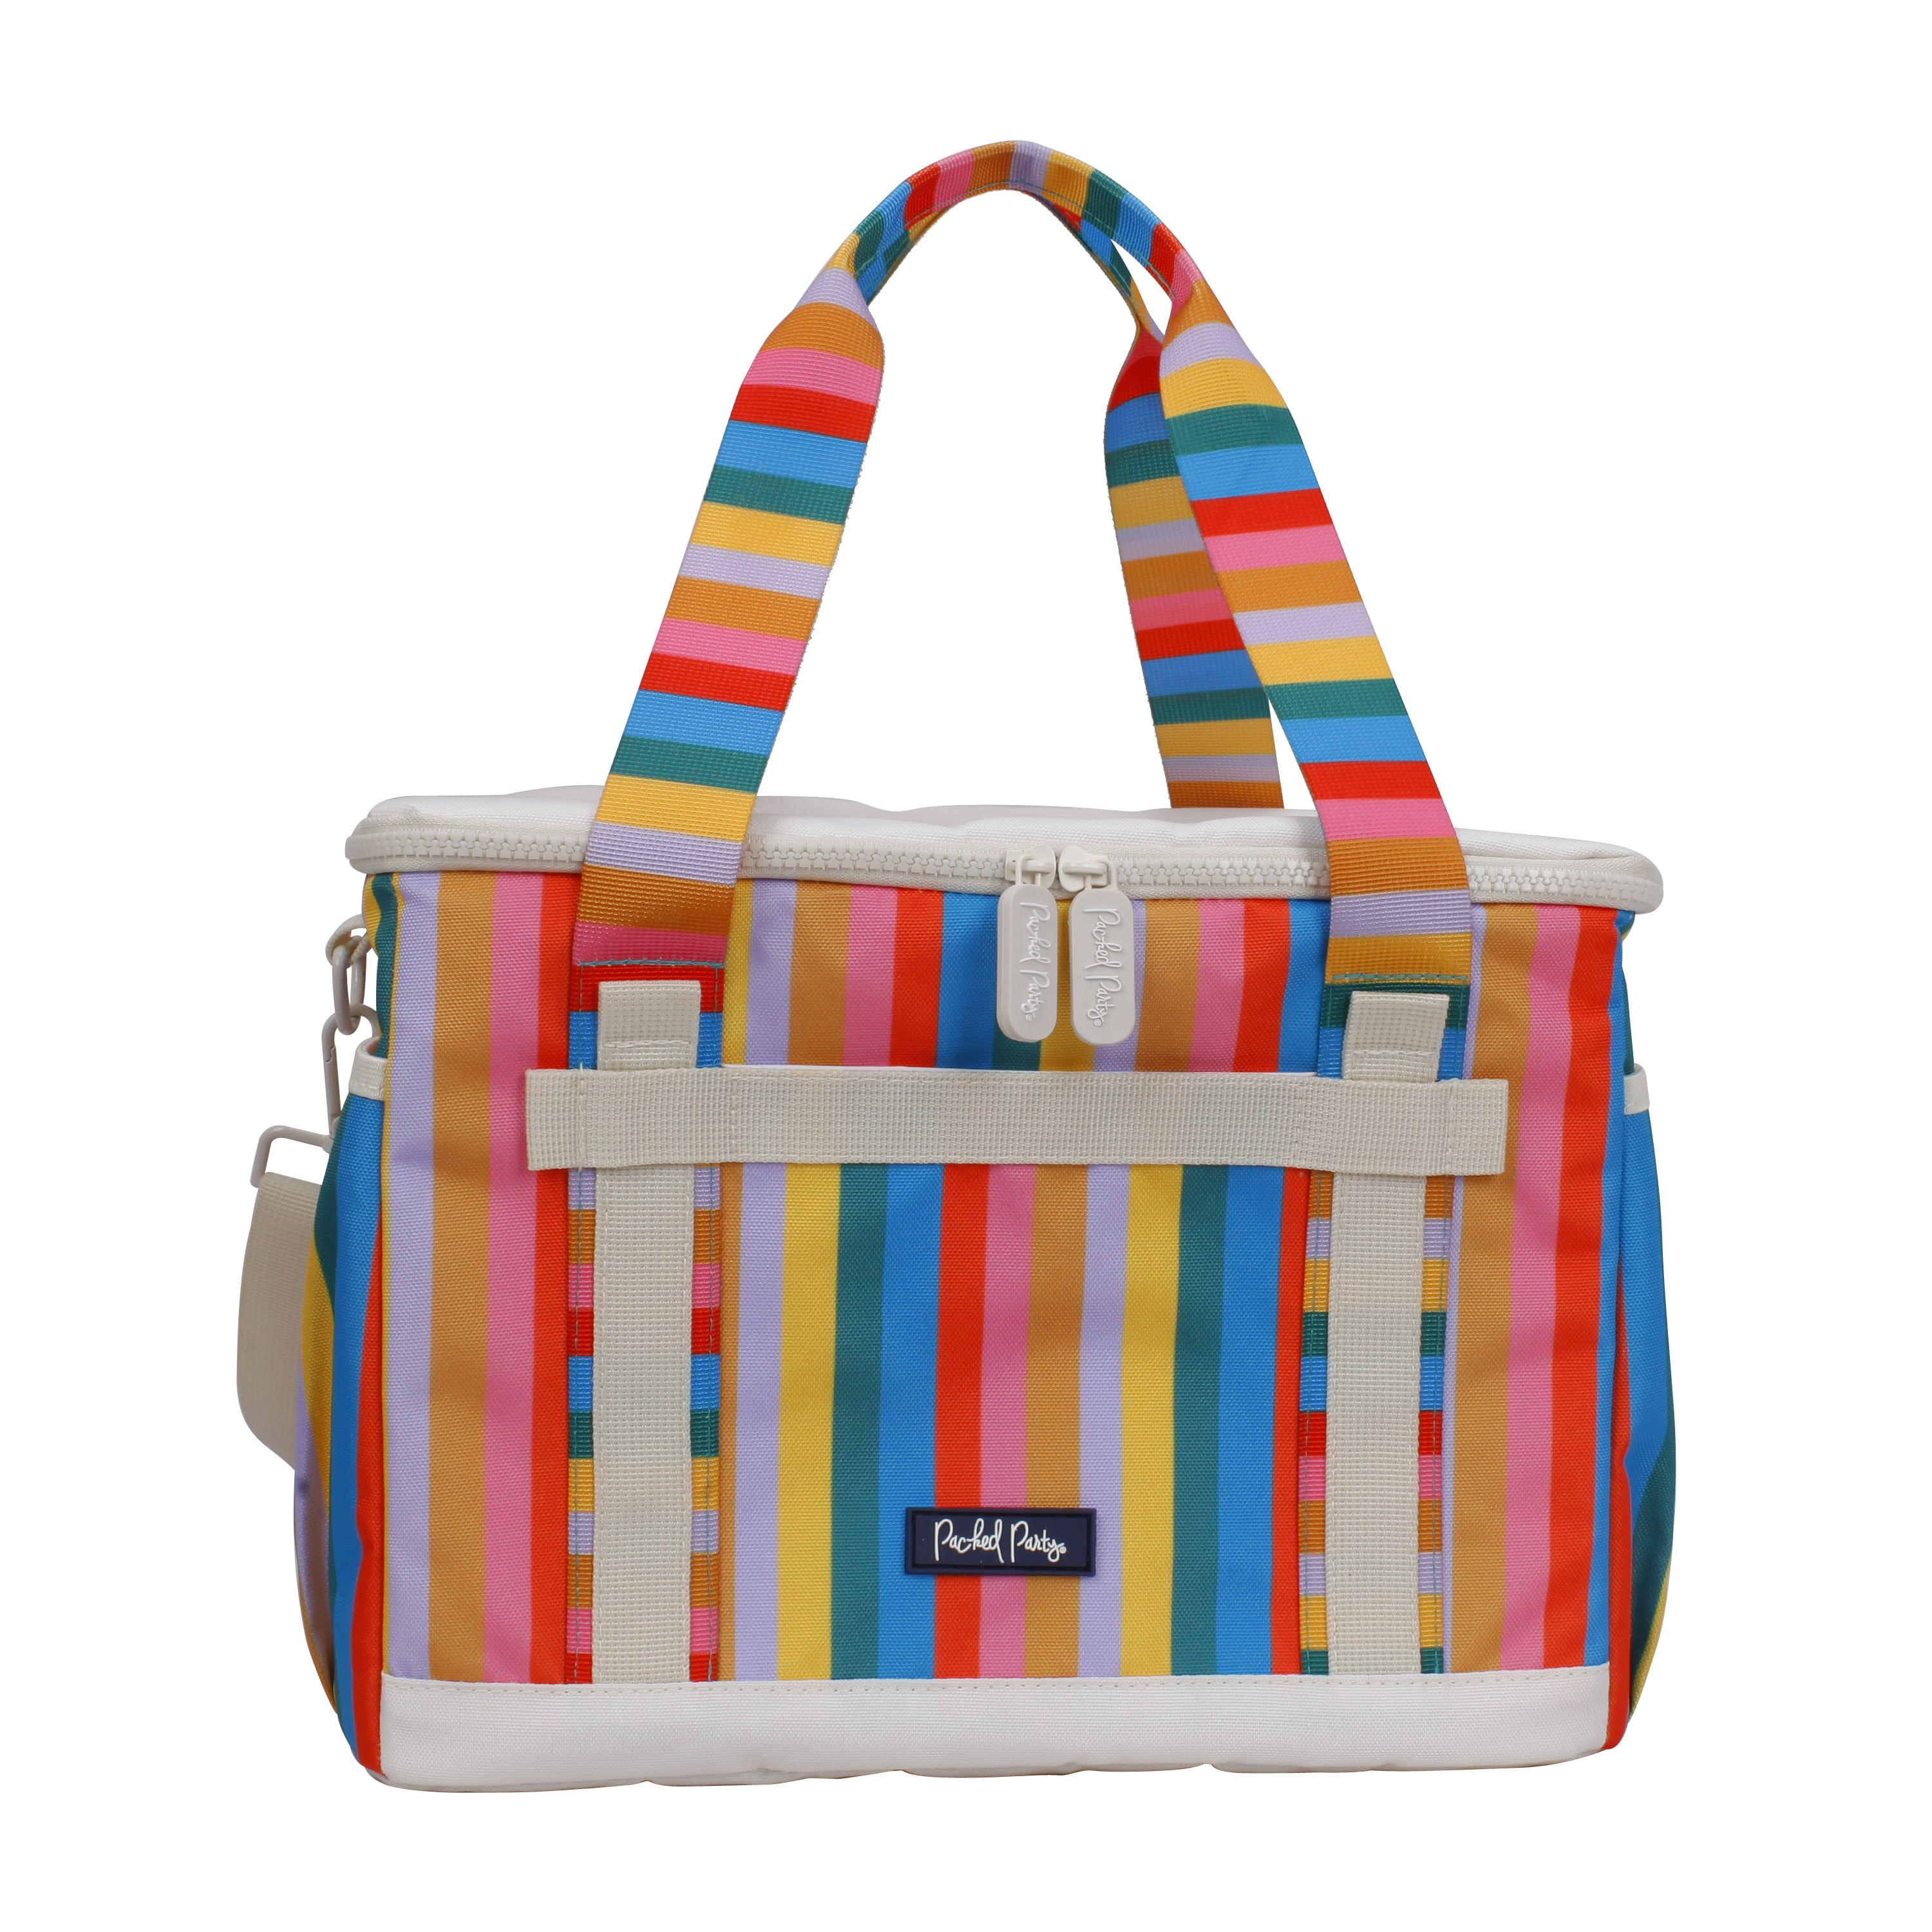 Packed Party Waves of Fun Soft Cooler Tote Bag